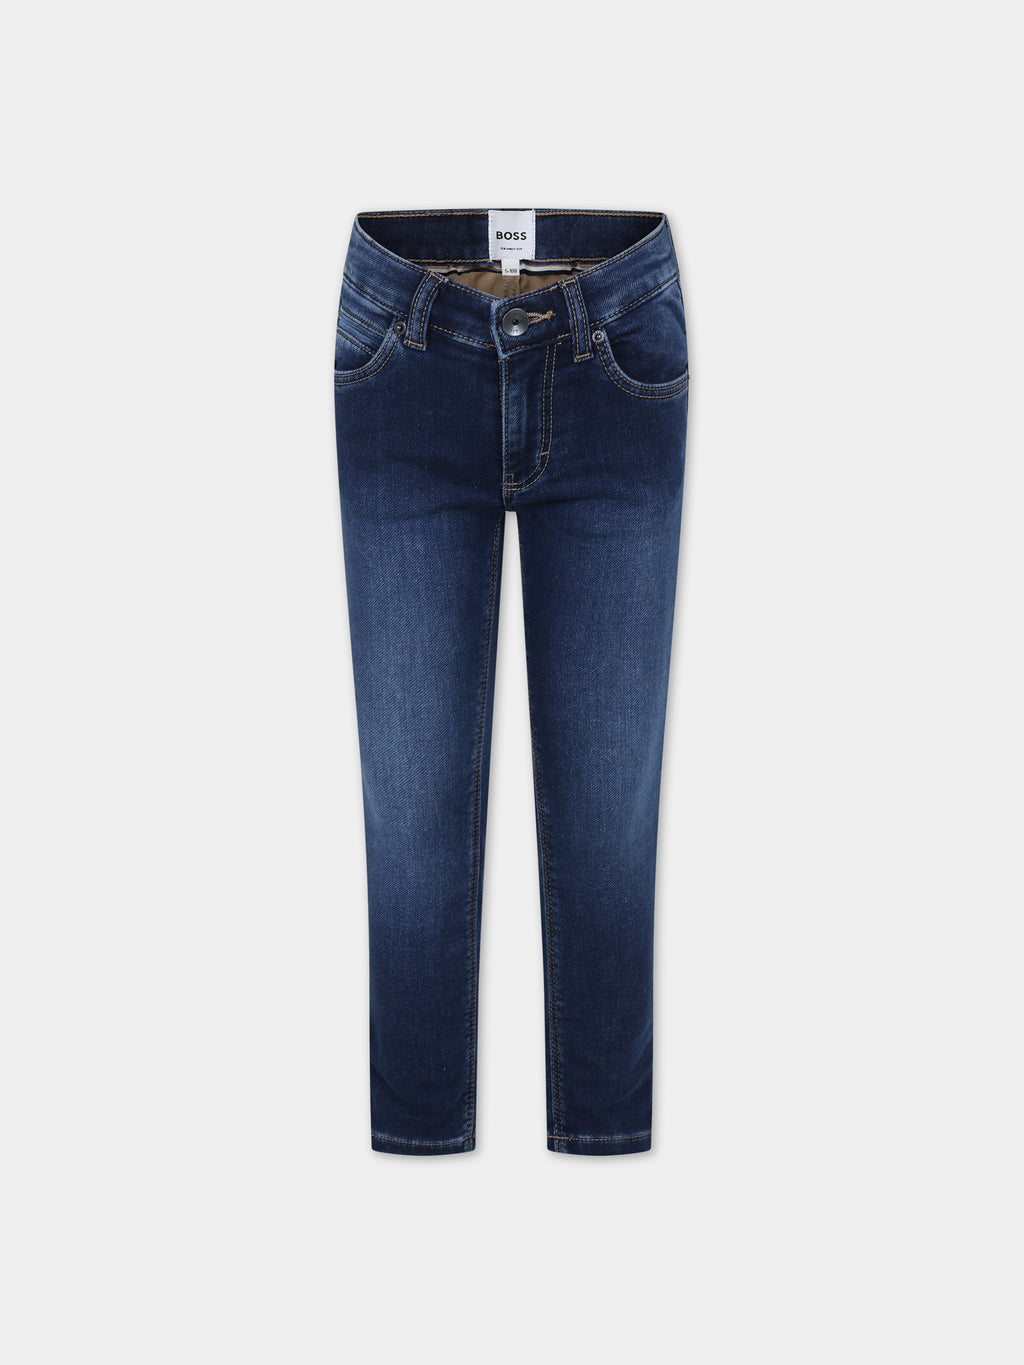 Blue skinny jeans for boy with logo